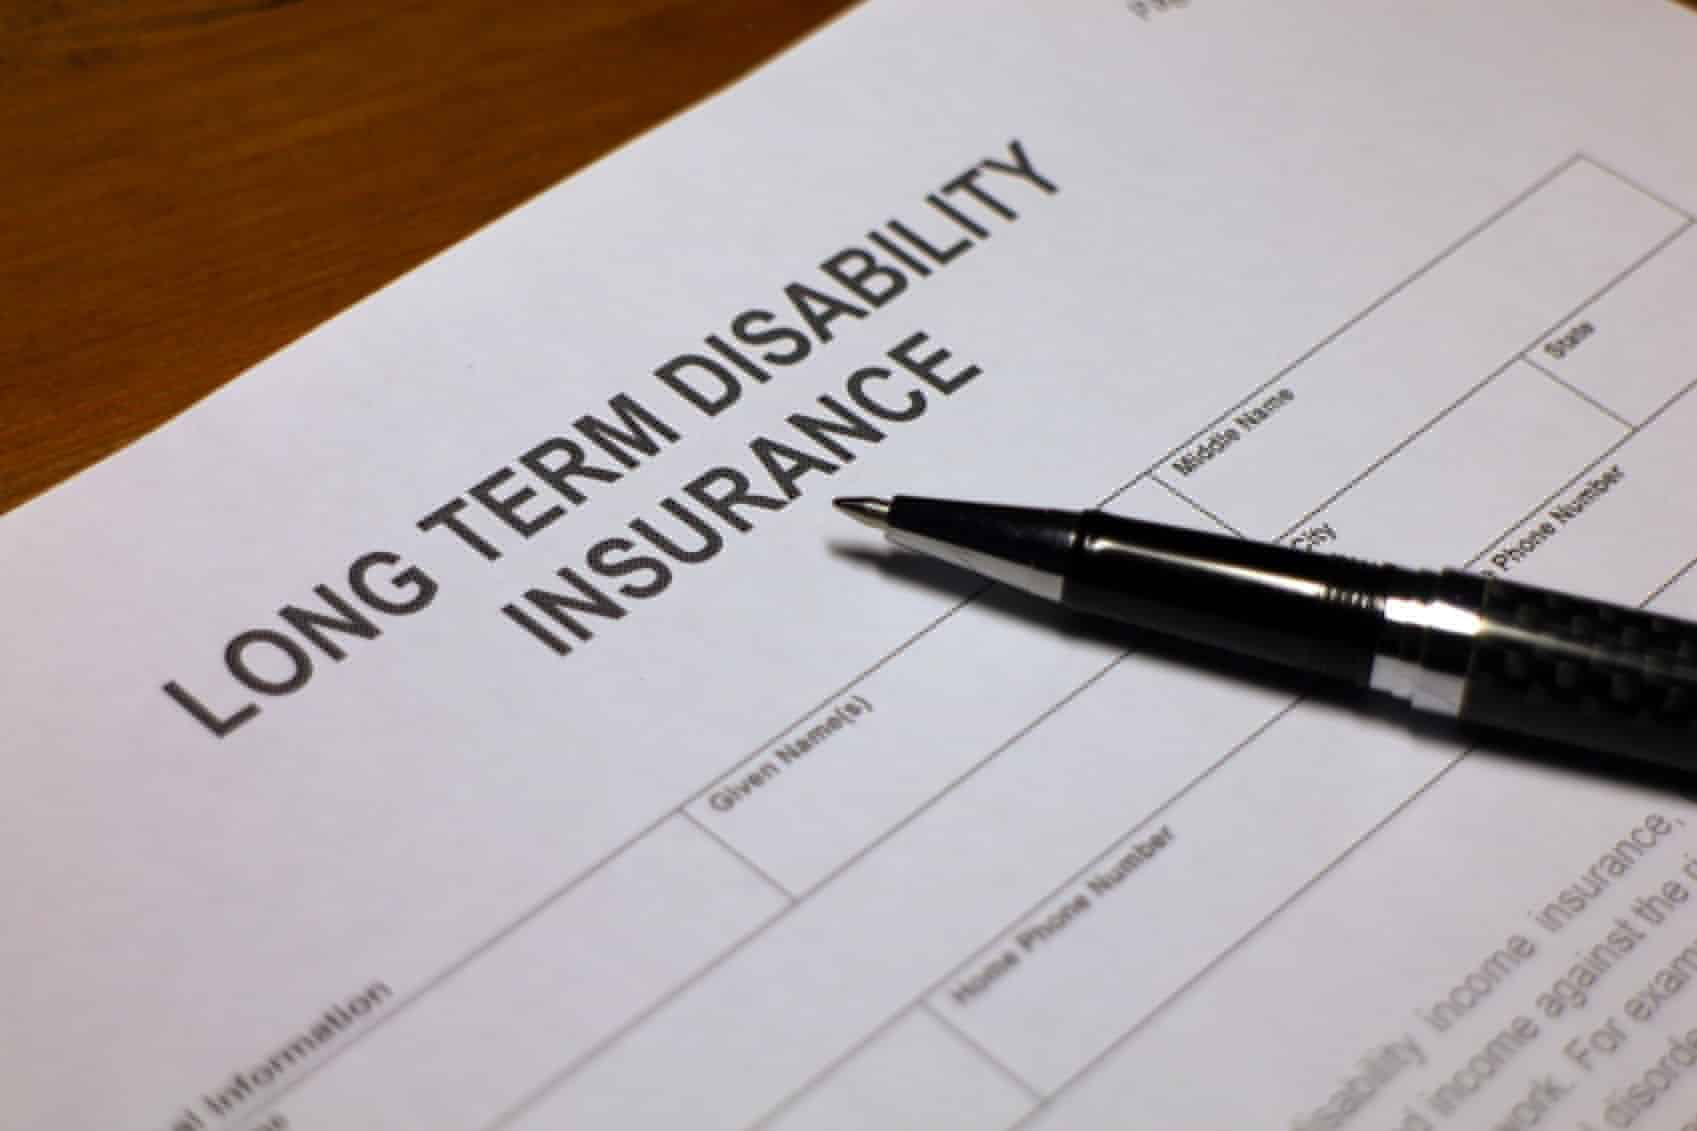 Someone filling out Long term Disability Insurance Application Form.